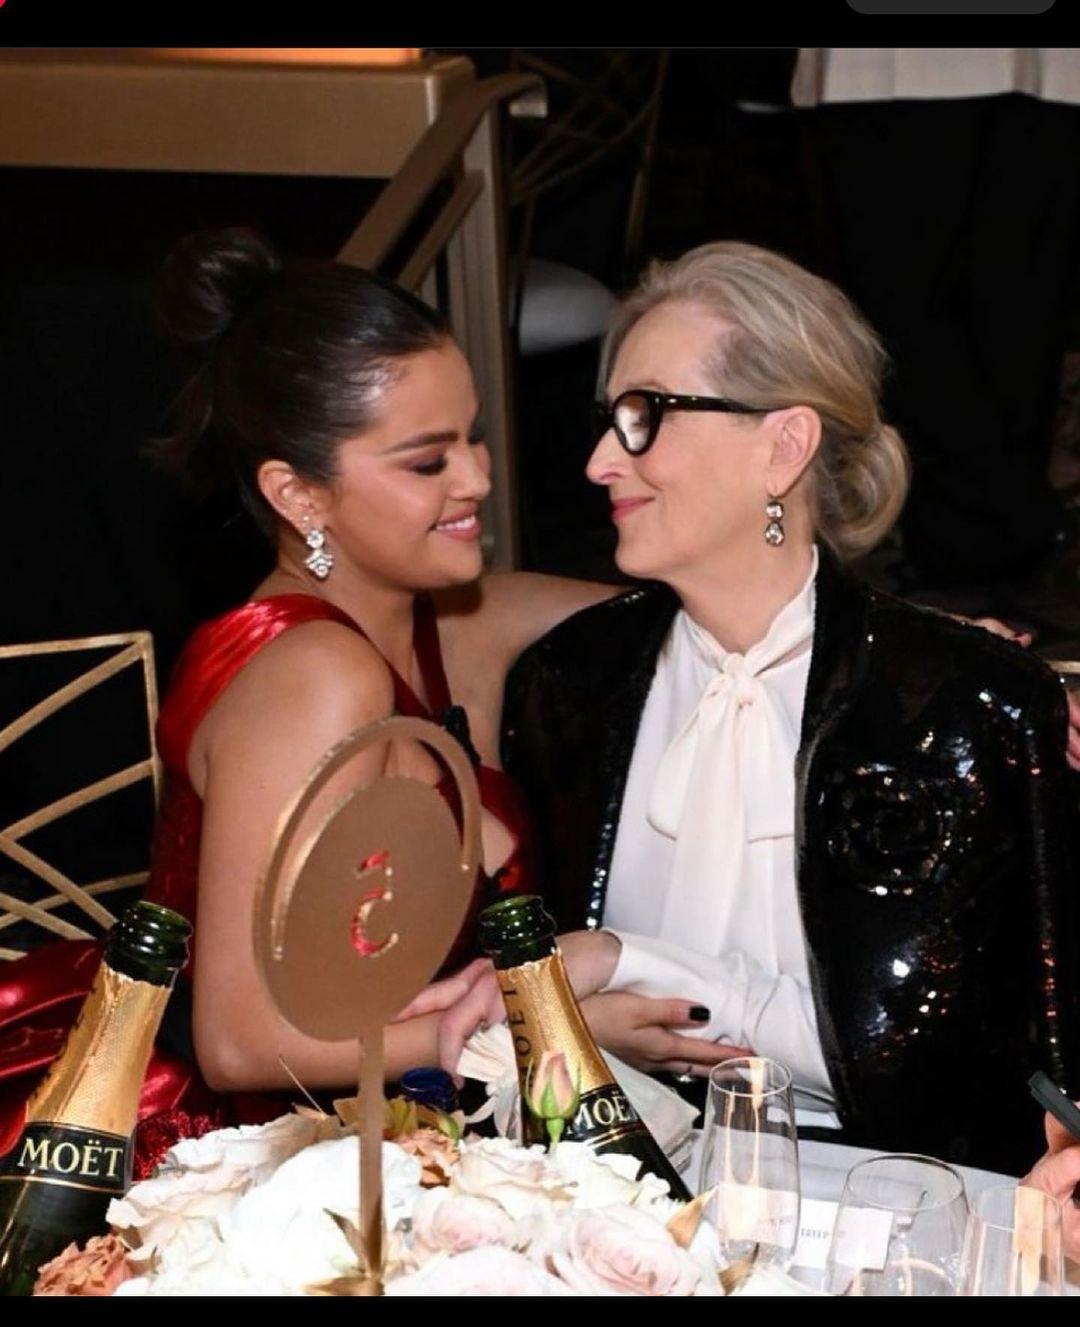 Selena Gomez posed with the legendary actress Meryl Streep. The picture spread rapidly with many calling it 'two icons in one frame'